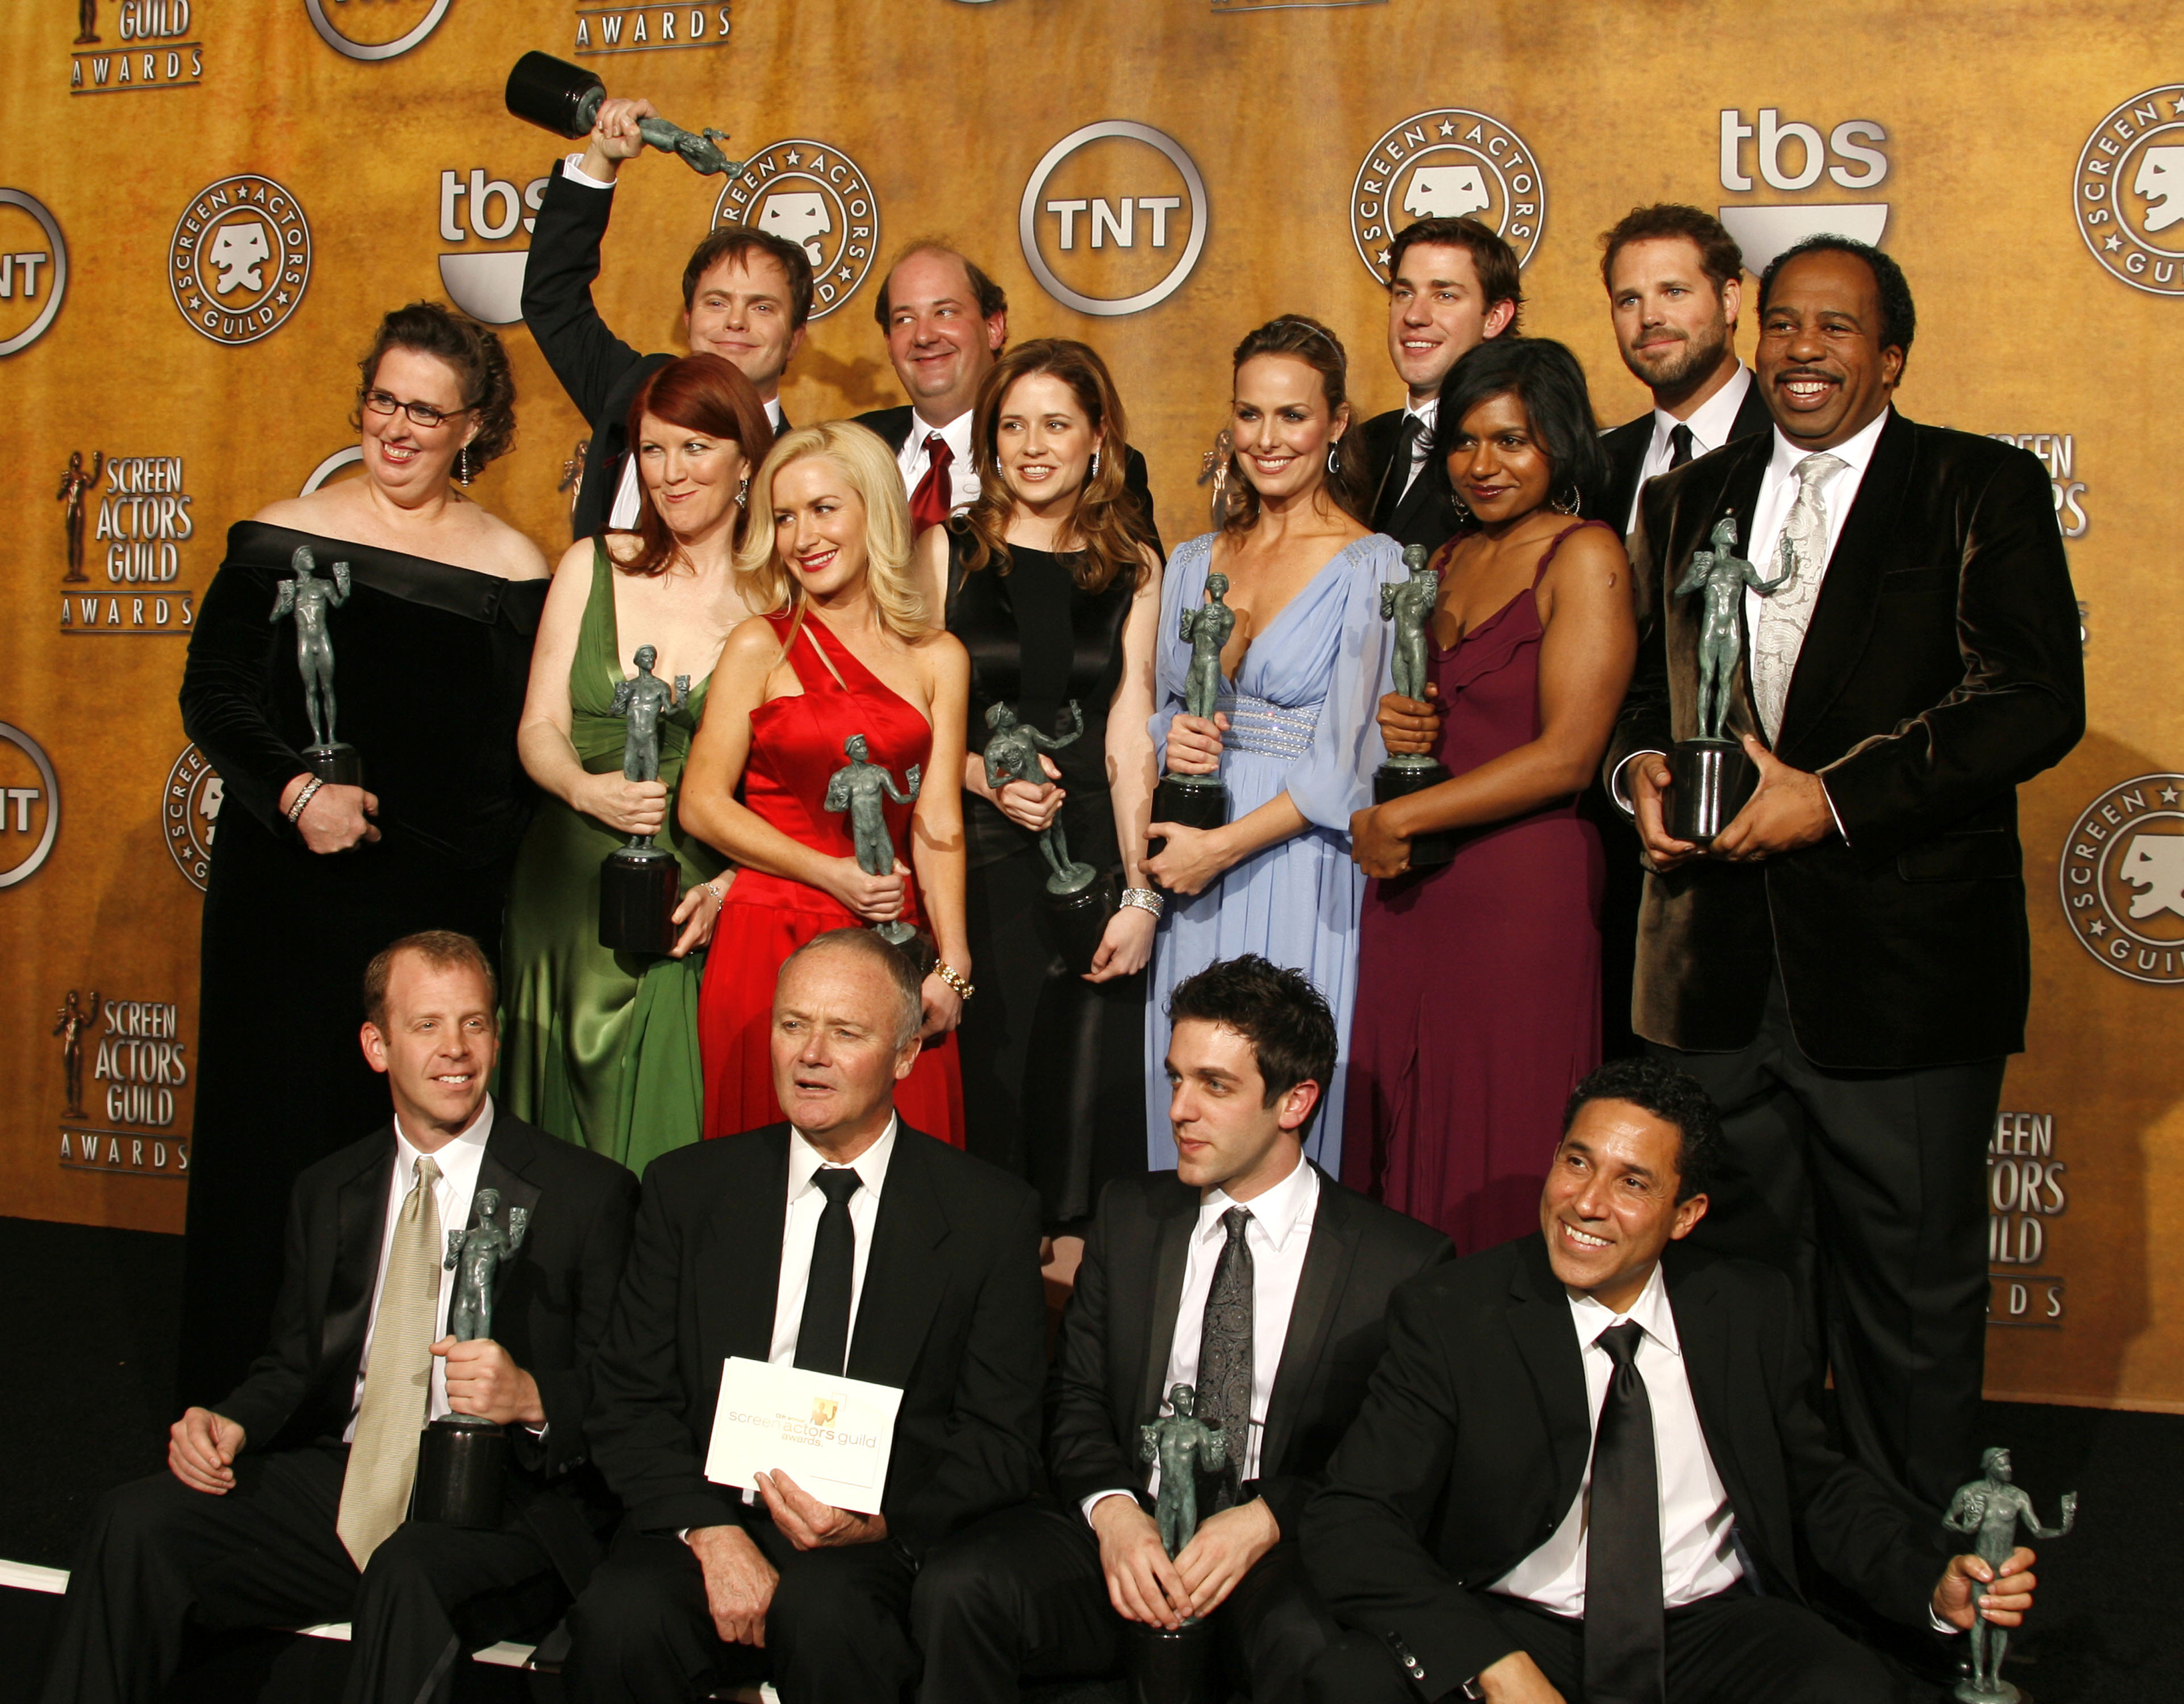 the cast of the office at the Screen Actors Guild Awards holding their trophies